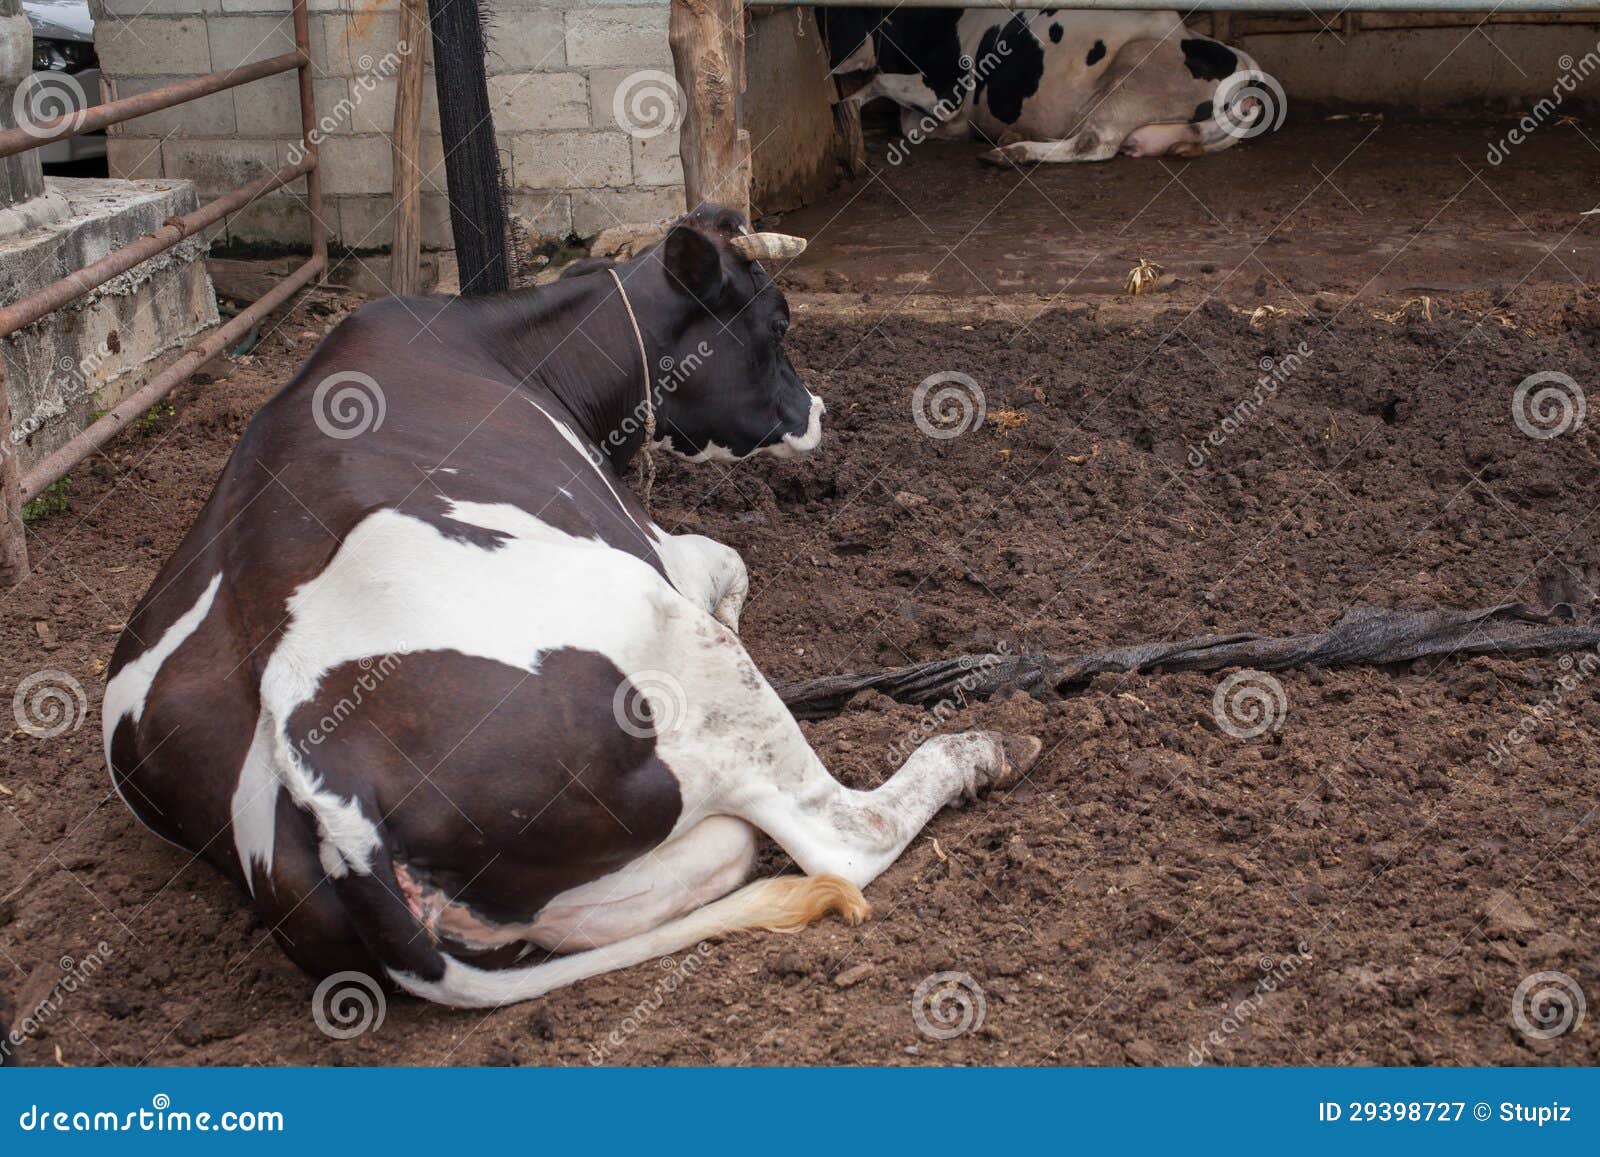 cow laying down in cowshed royalty free stock photography